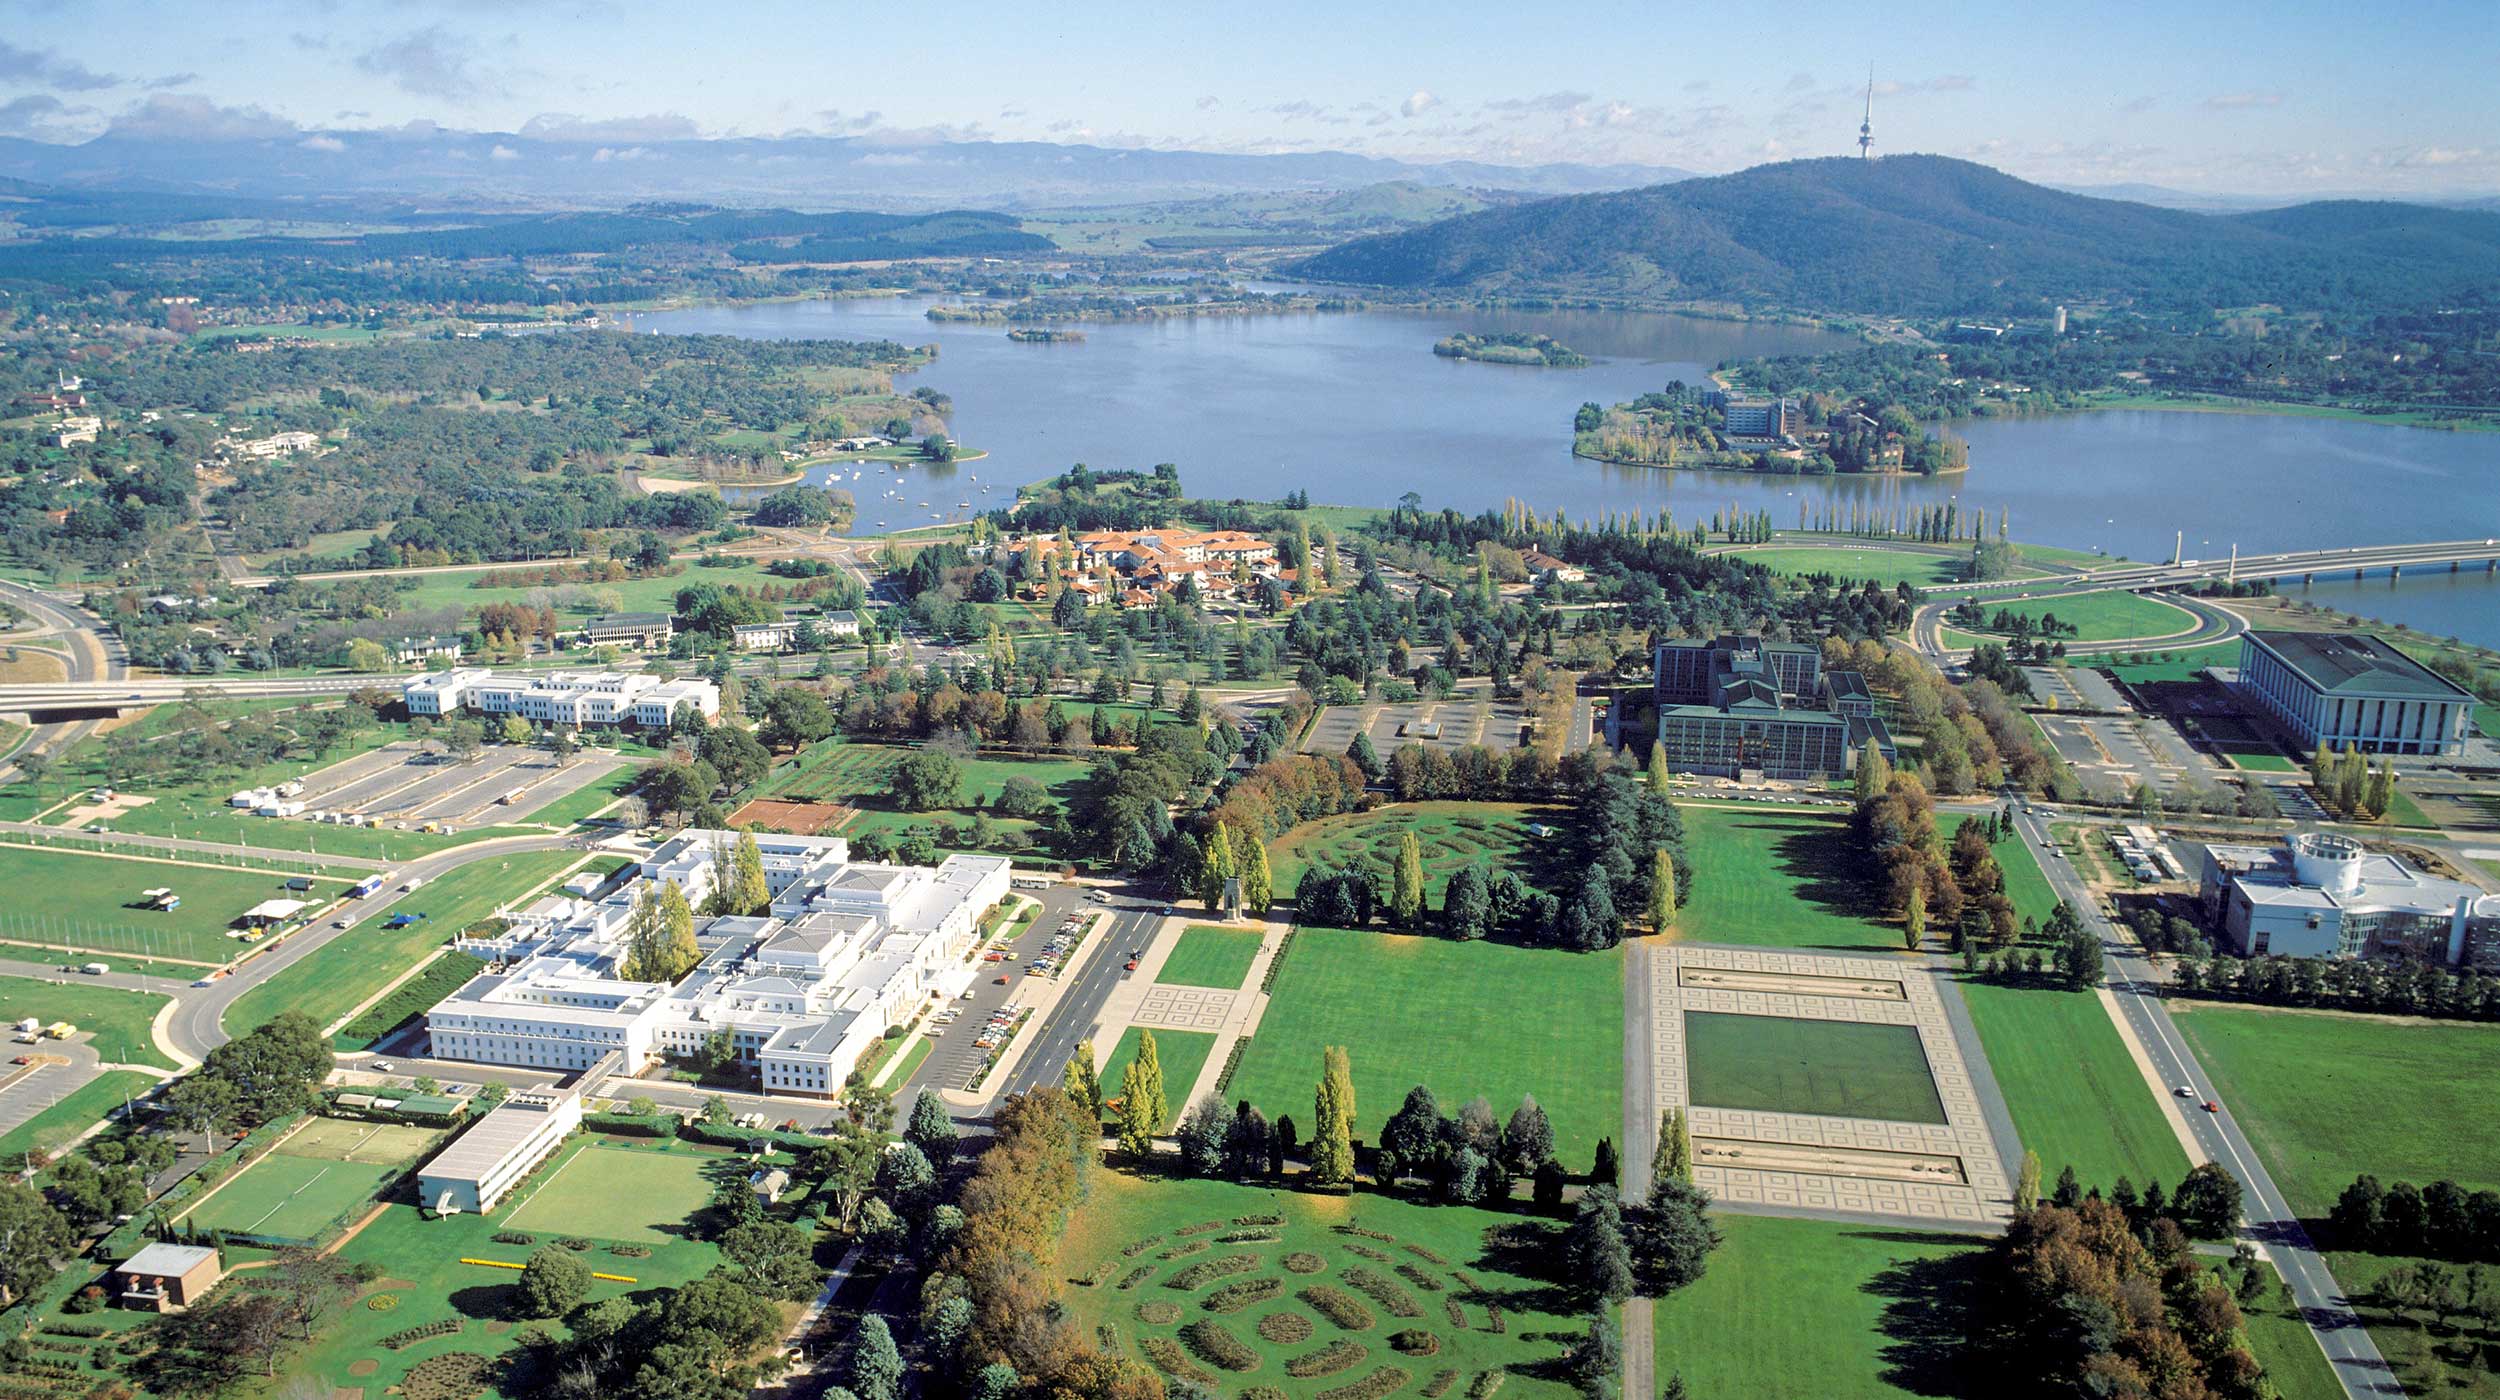 Aerial view of old parliament buildings and Lake Burley Griffin, Canberra, Australia 